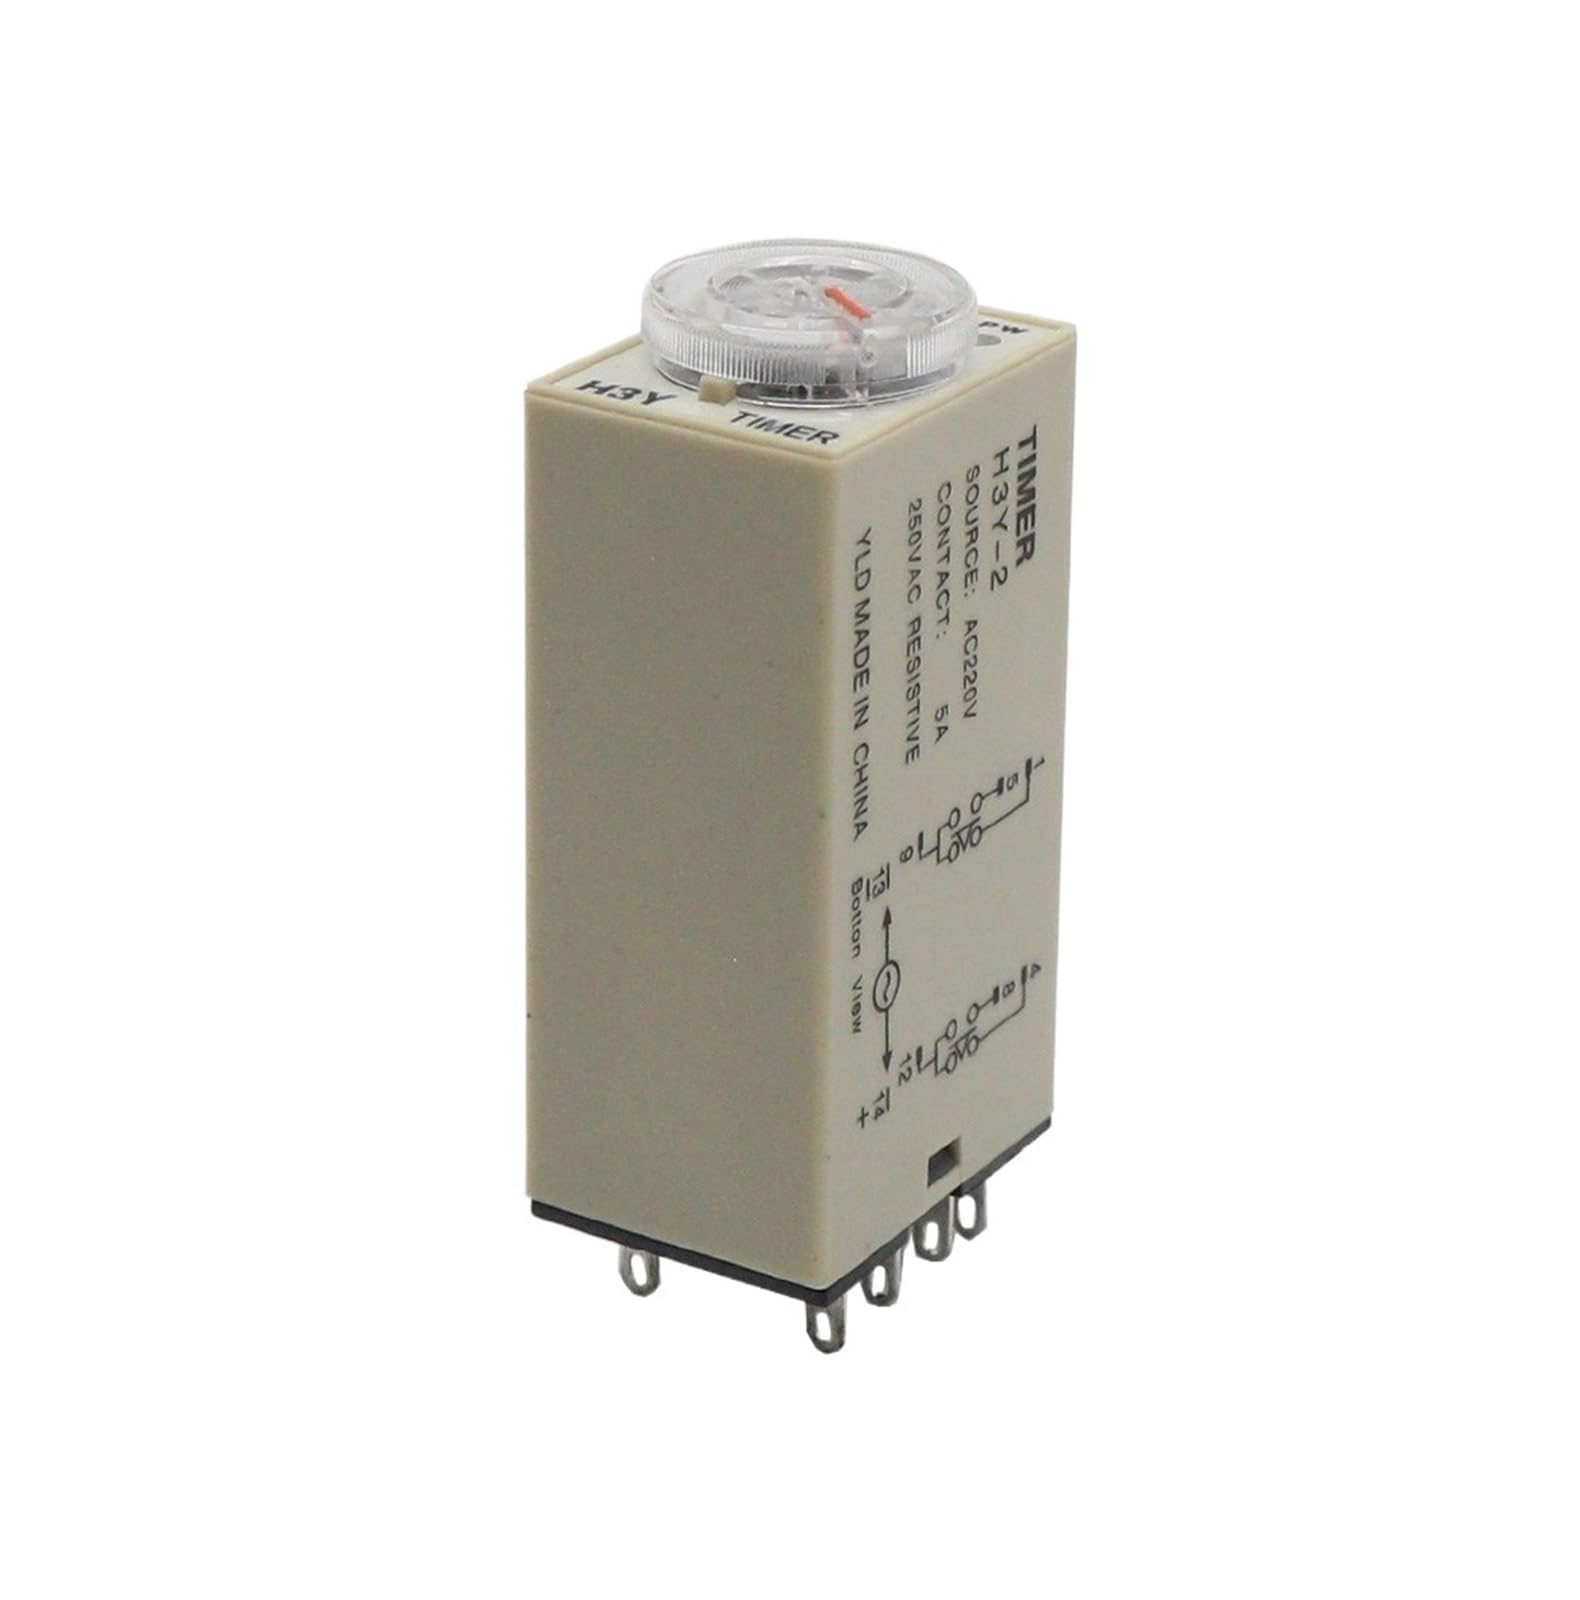 1pcs Power on Delay Time Relay H3Y-2 Small 8-pinDC12V24vAC220v Timer Switch 1S 3S 5S 30S 60S 5M 10M 30M 60M NWPNLXEA(DC 12V,H3Y-2 1Minute) von NWPNLXEA